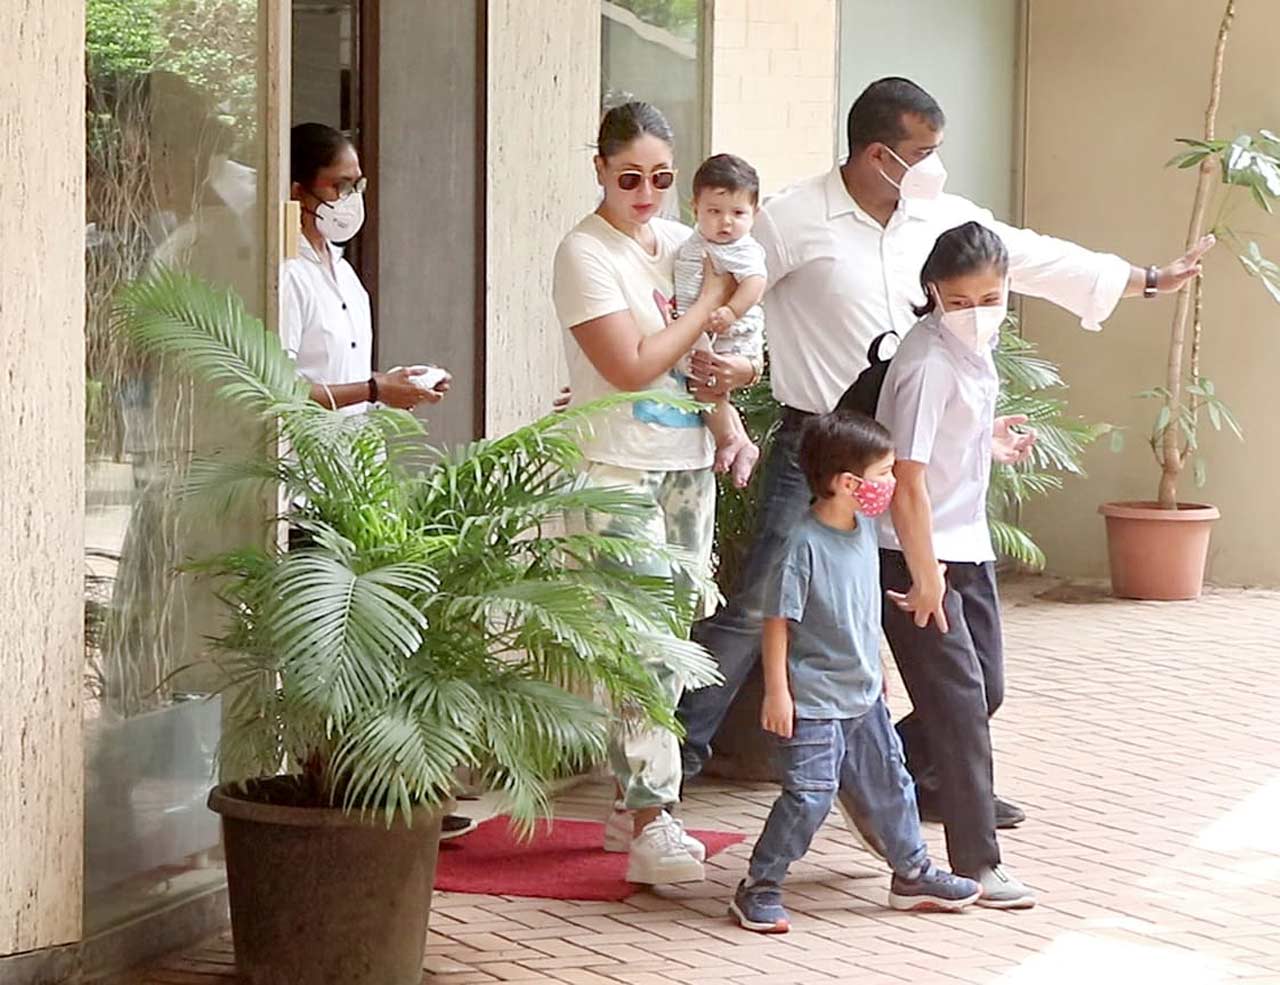 Kareena Kapoor Khan with kids - Jeh and Taimur was snapped at her father Randhir Kapoor's residence. The entire family hosted a small get-together on the ocassion of Rishi Kapoor's 69th birth anniversary. 